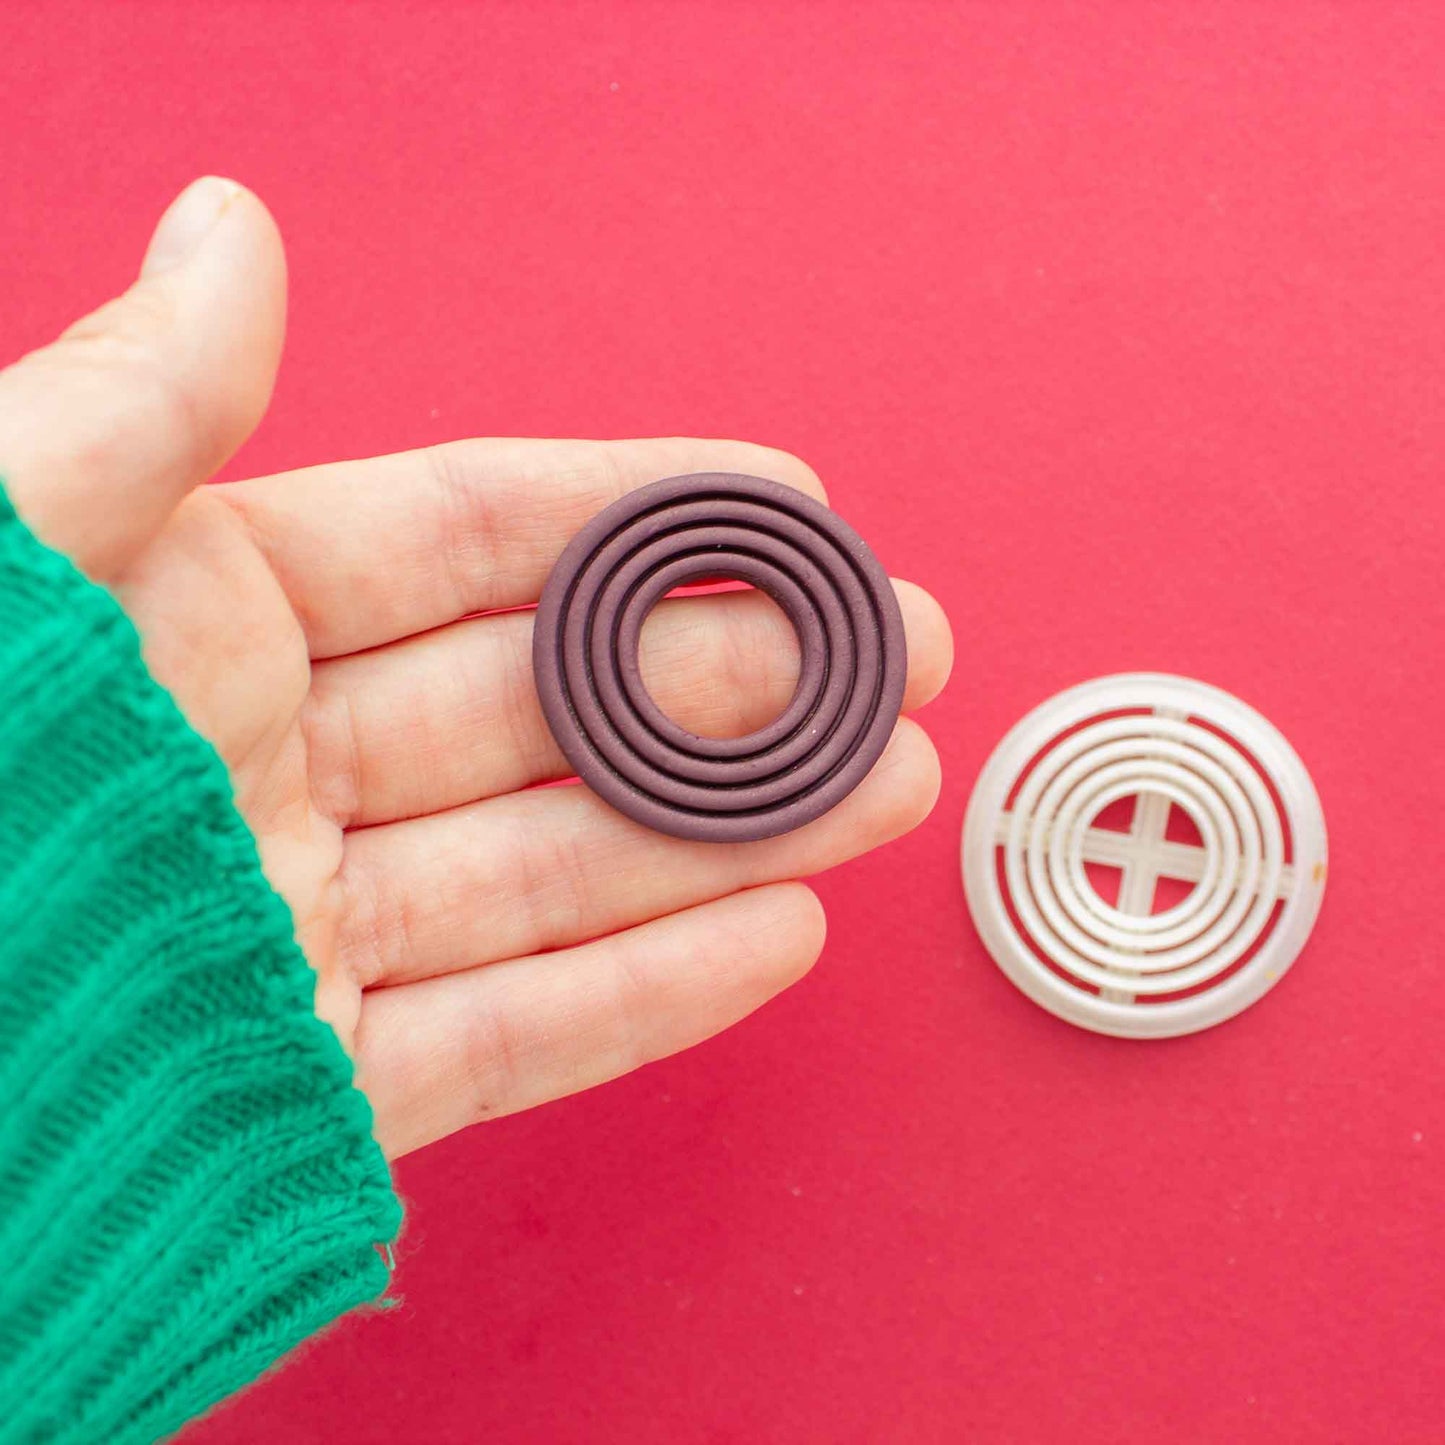 Circle shape with inside circle patterns on a hand in a red background with a polymer clay cutter of the same shape